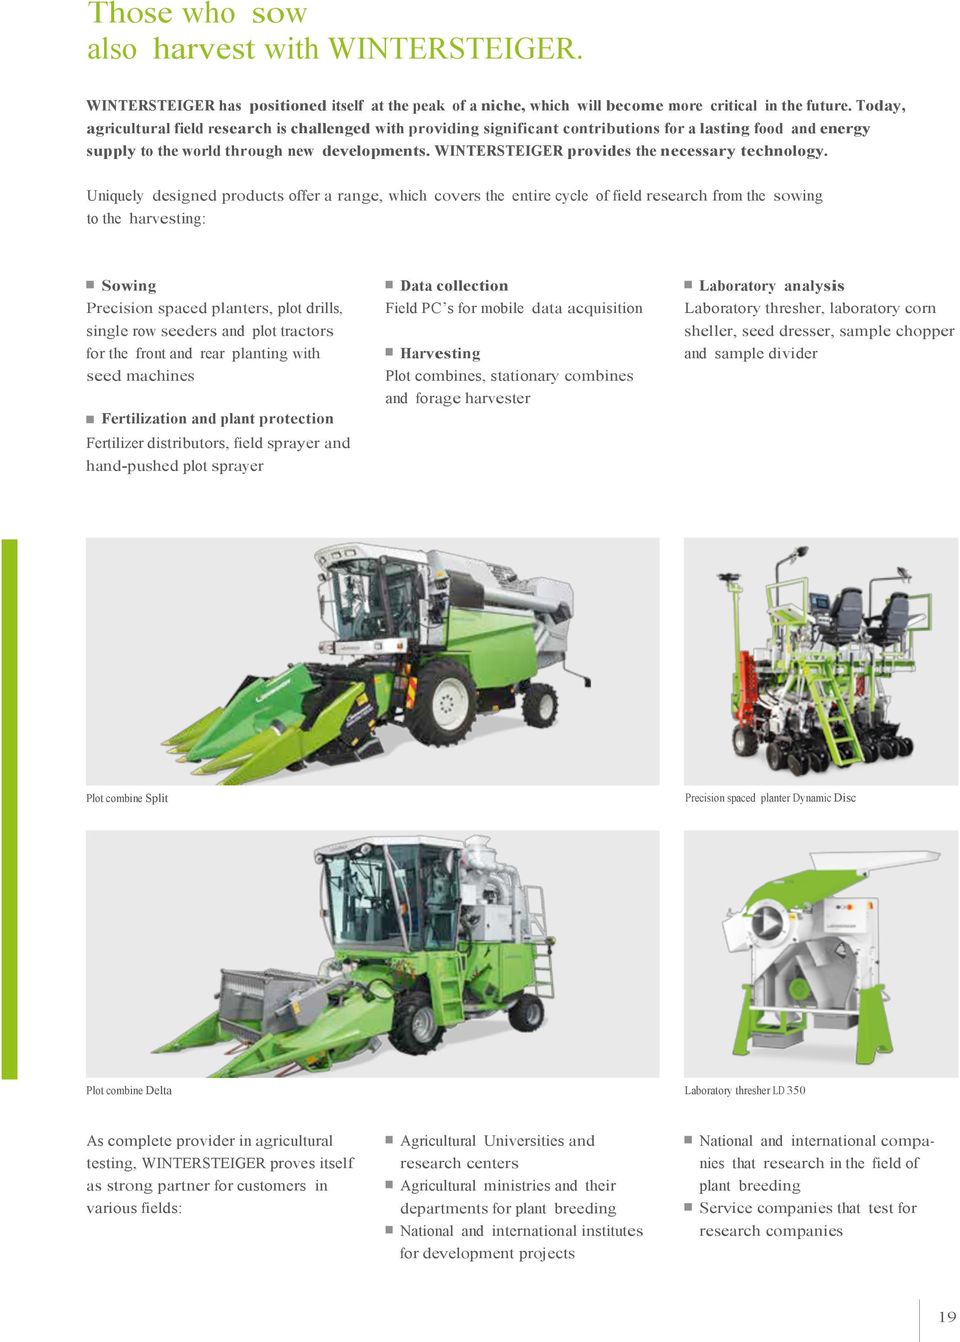 WINTERSTEIGER provides the necessary technology.